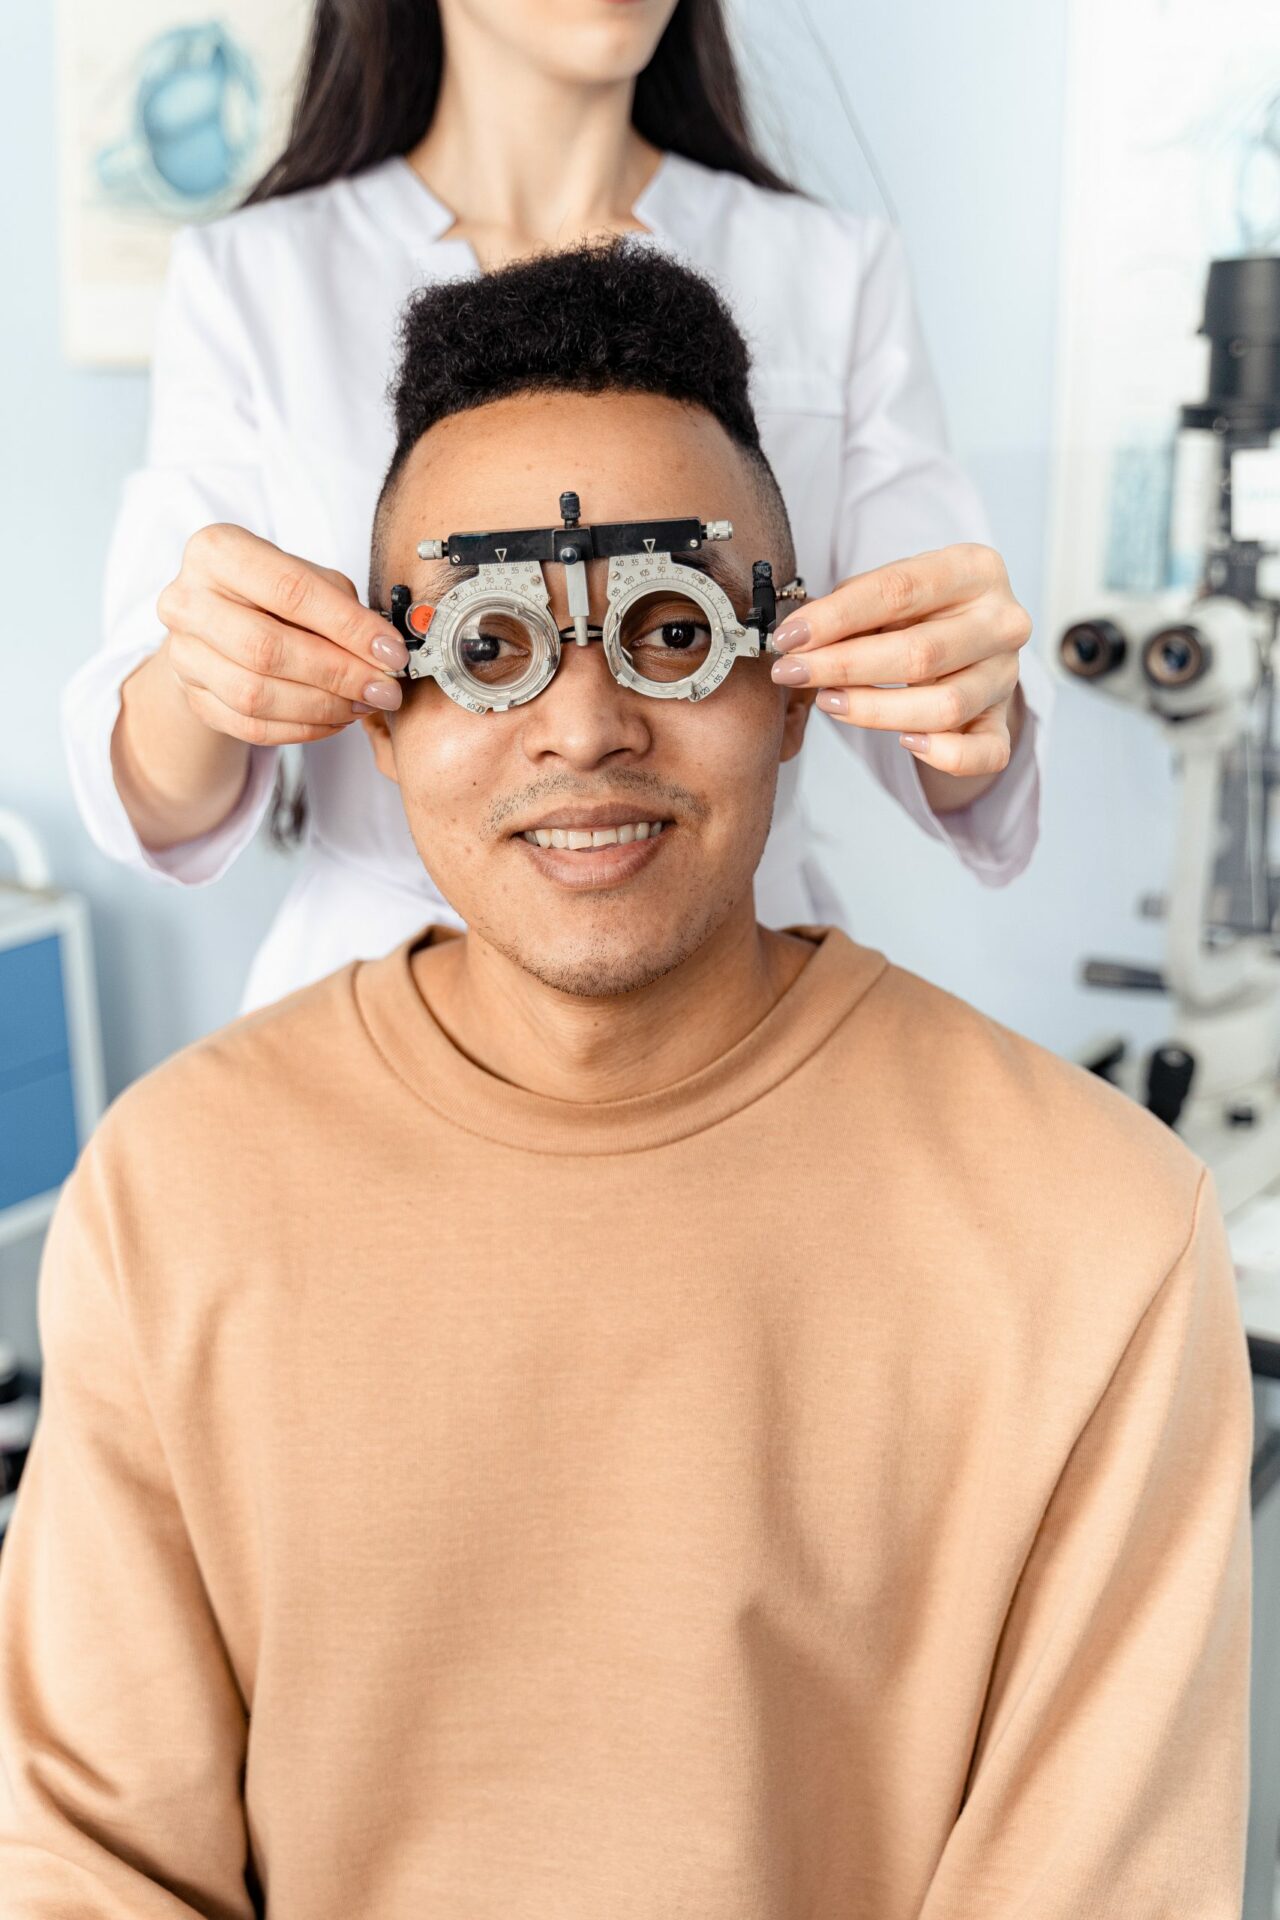 Treat glaucoma eye condition to prevent blindness